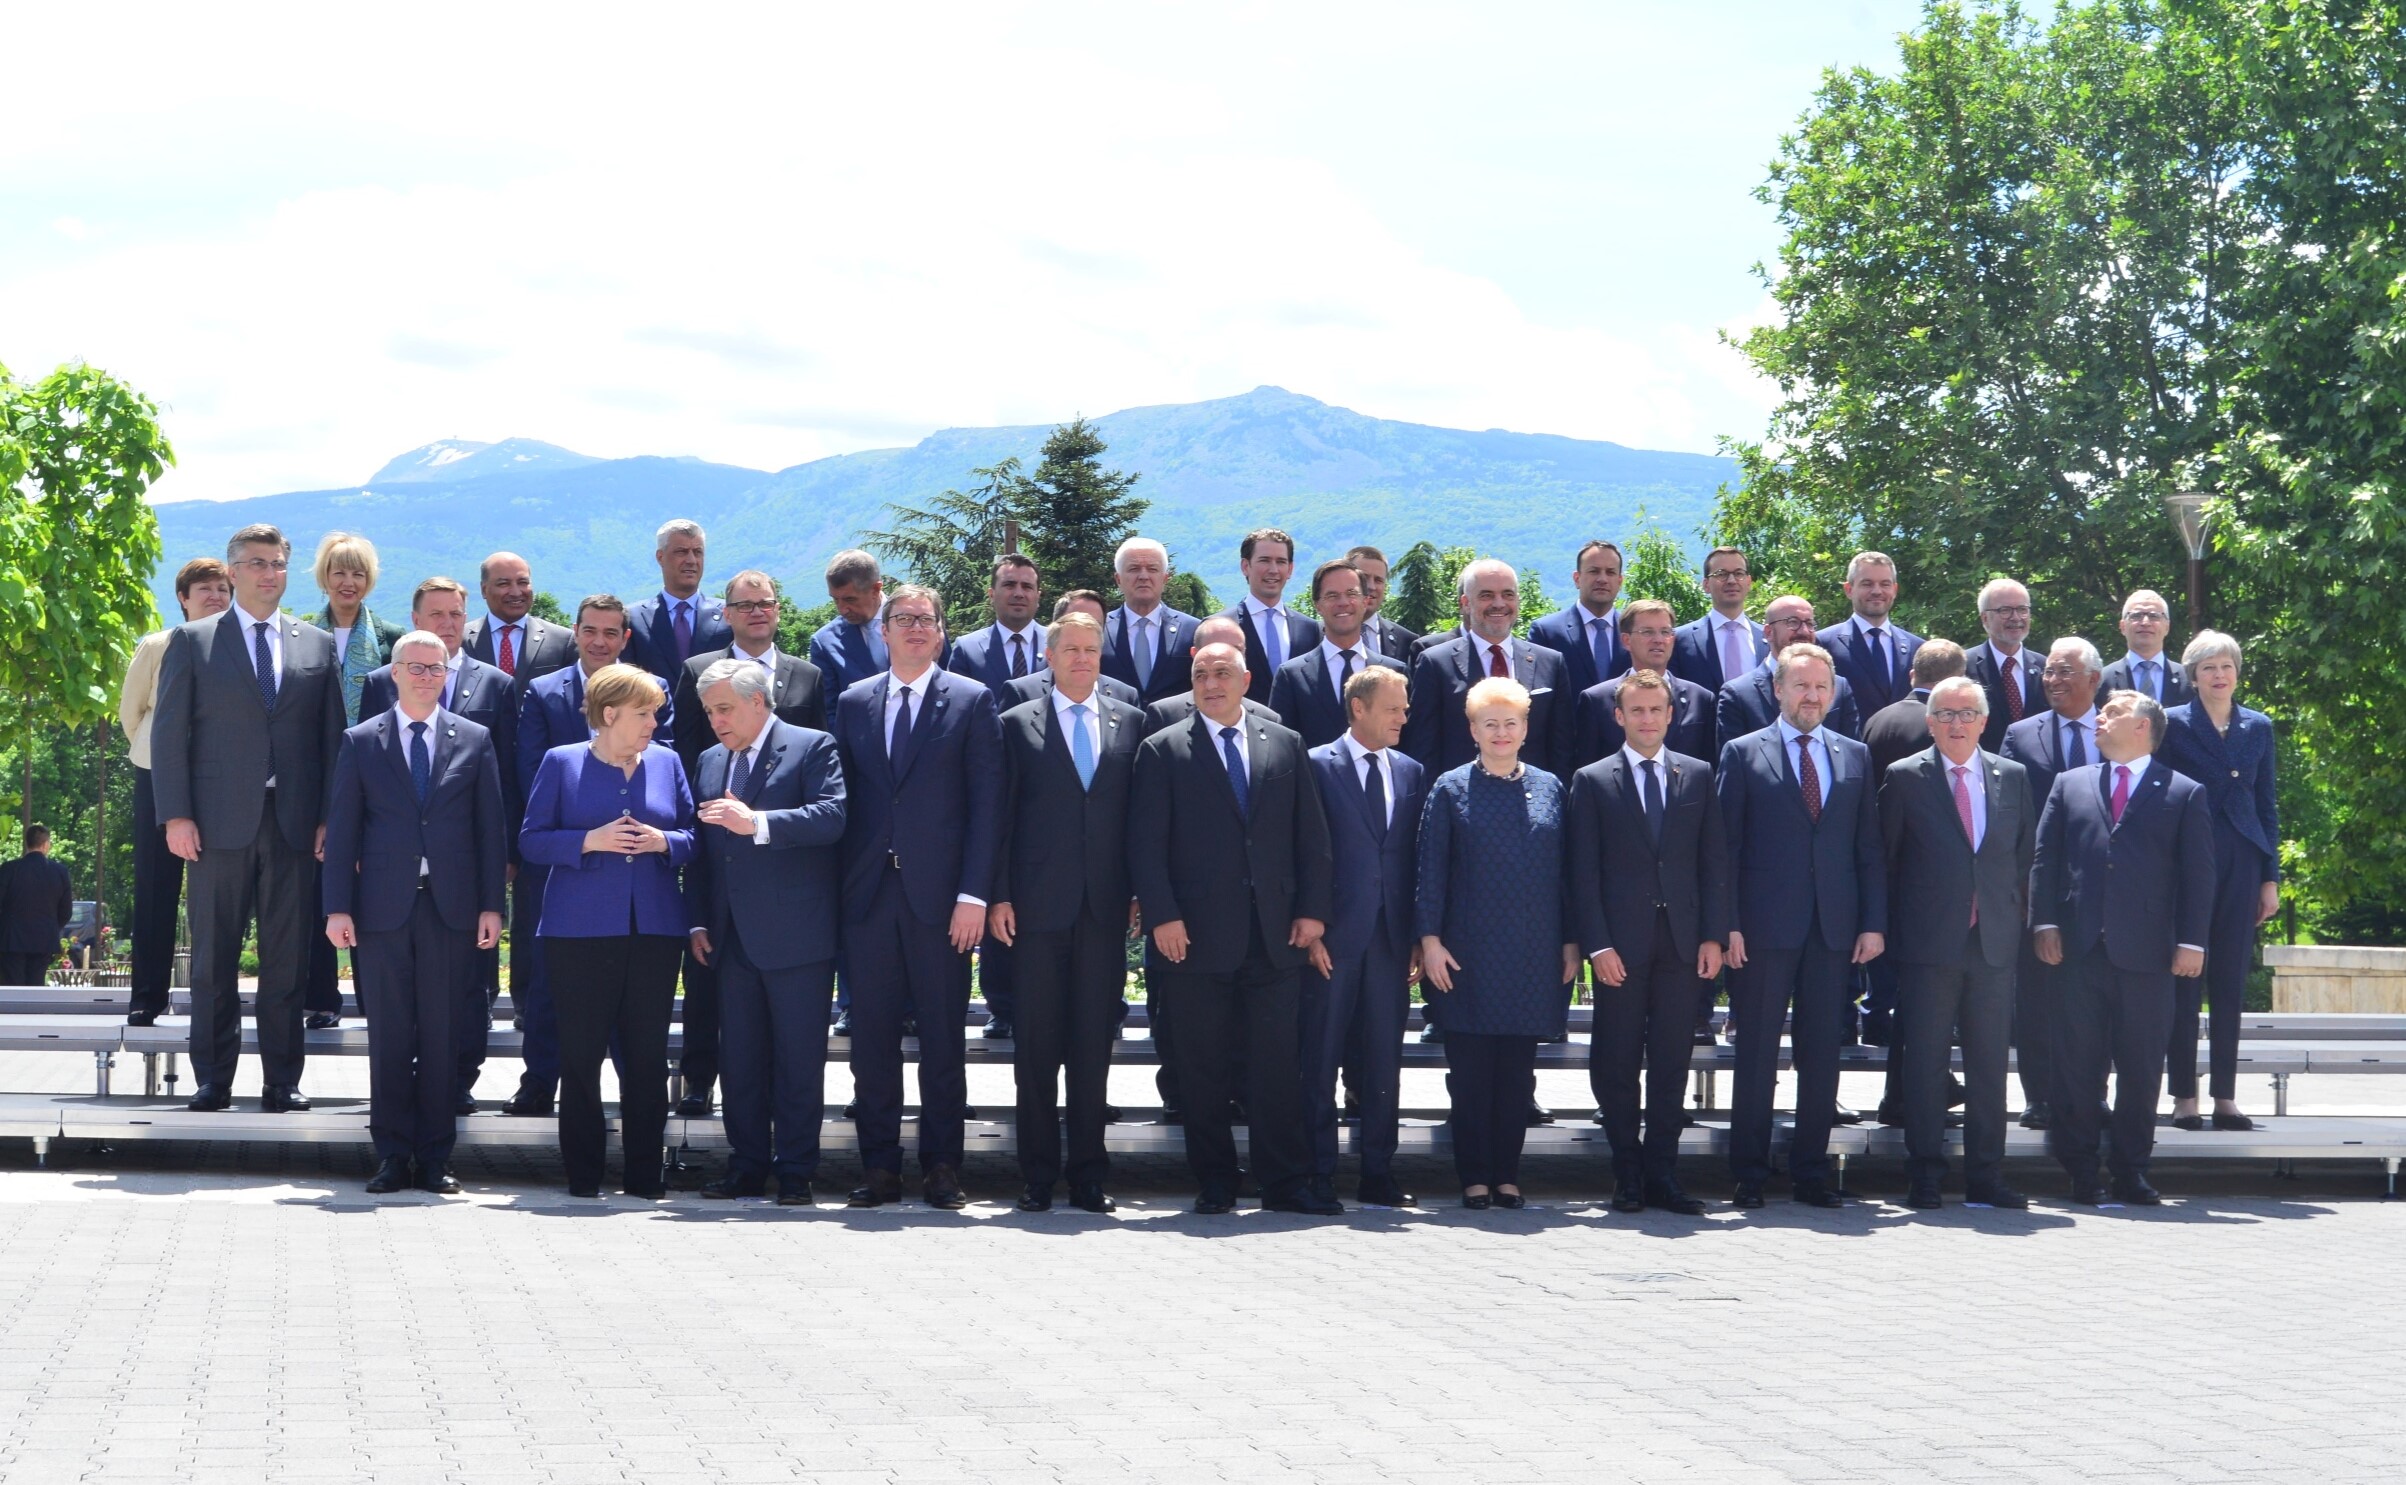 Participants of the  EU-Western Balkans Summit hosted by the Bulgarian Presidency of the Council of the EU, in Sofia on 17 May 2018. RCC Secretary General Goran Svilanovic - top row, first one on the right. (Photo: Yordan Simeonov (EU2018BG))